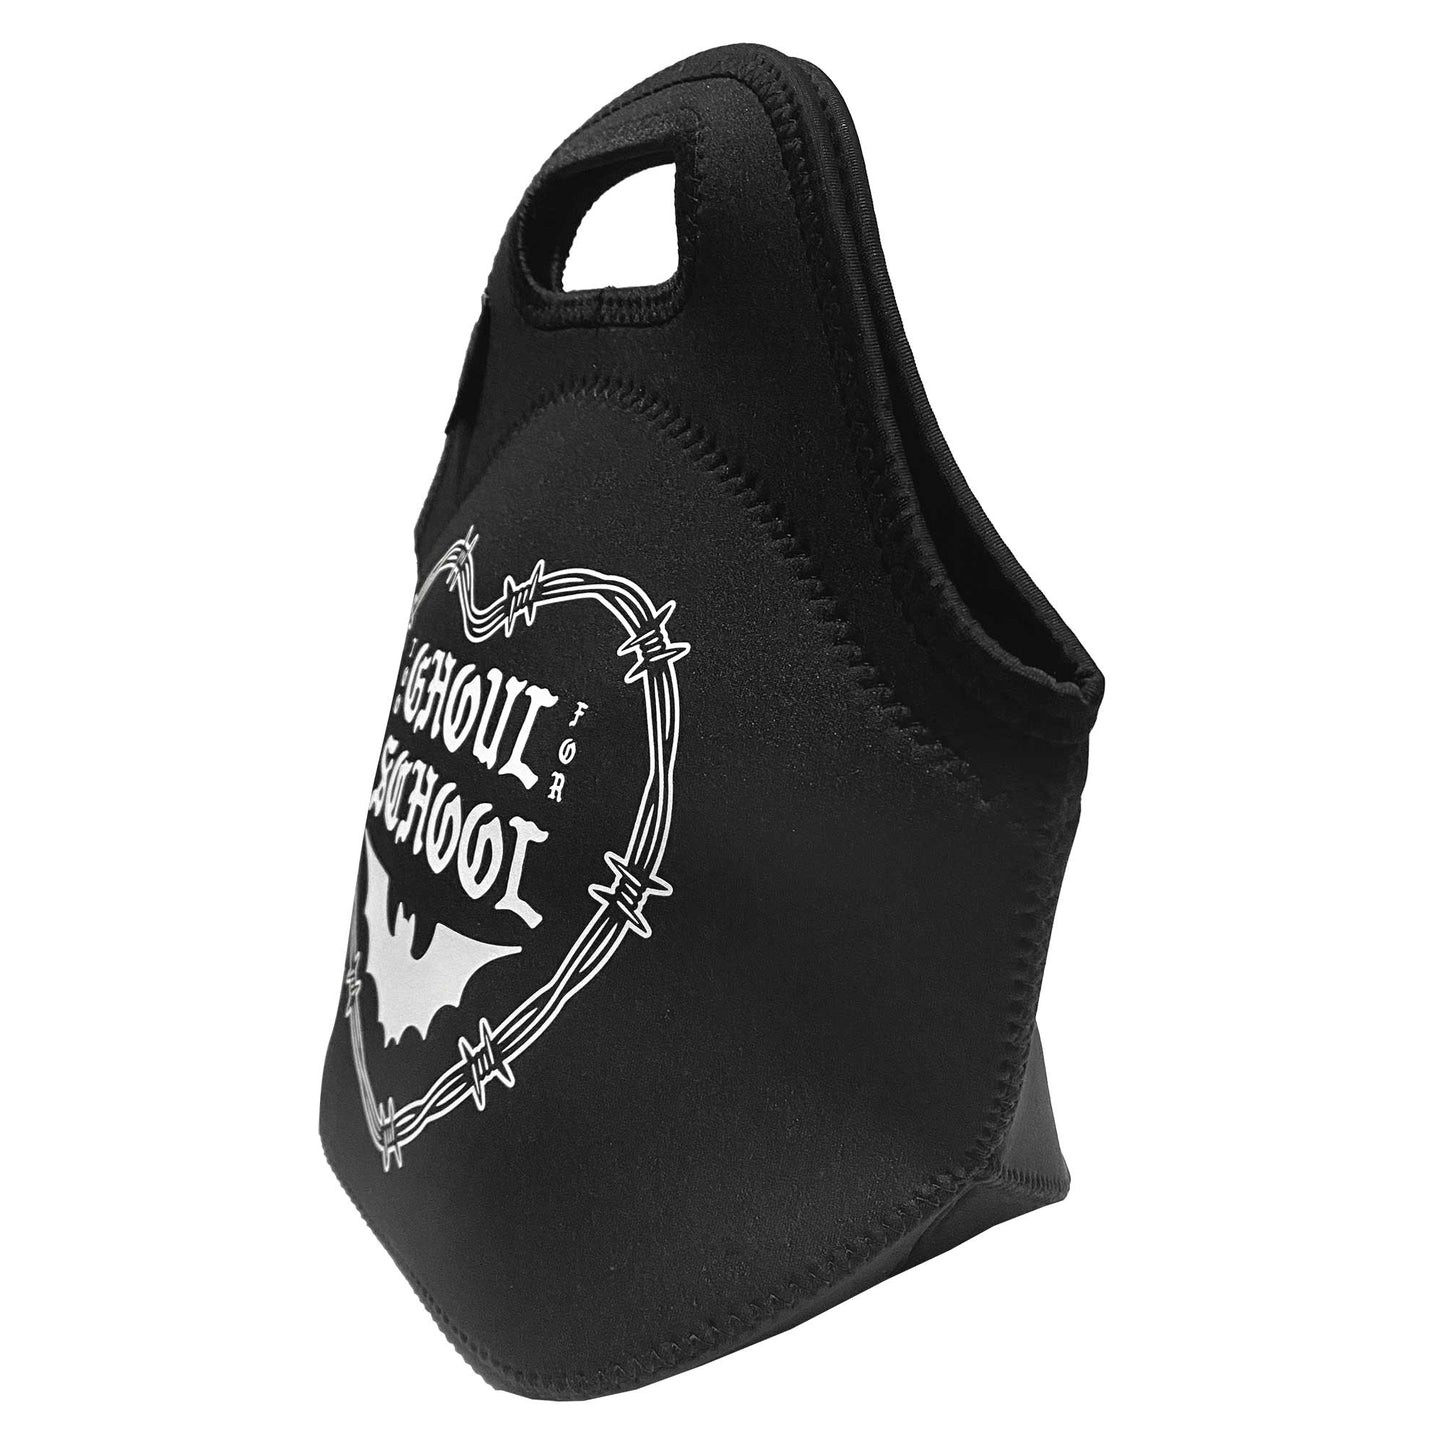 Ghoul School Insulated Lunch Bag in Black | Kids Spooky Snacks Lunchbox | 7.5" x 7"